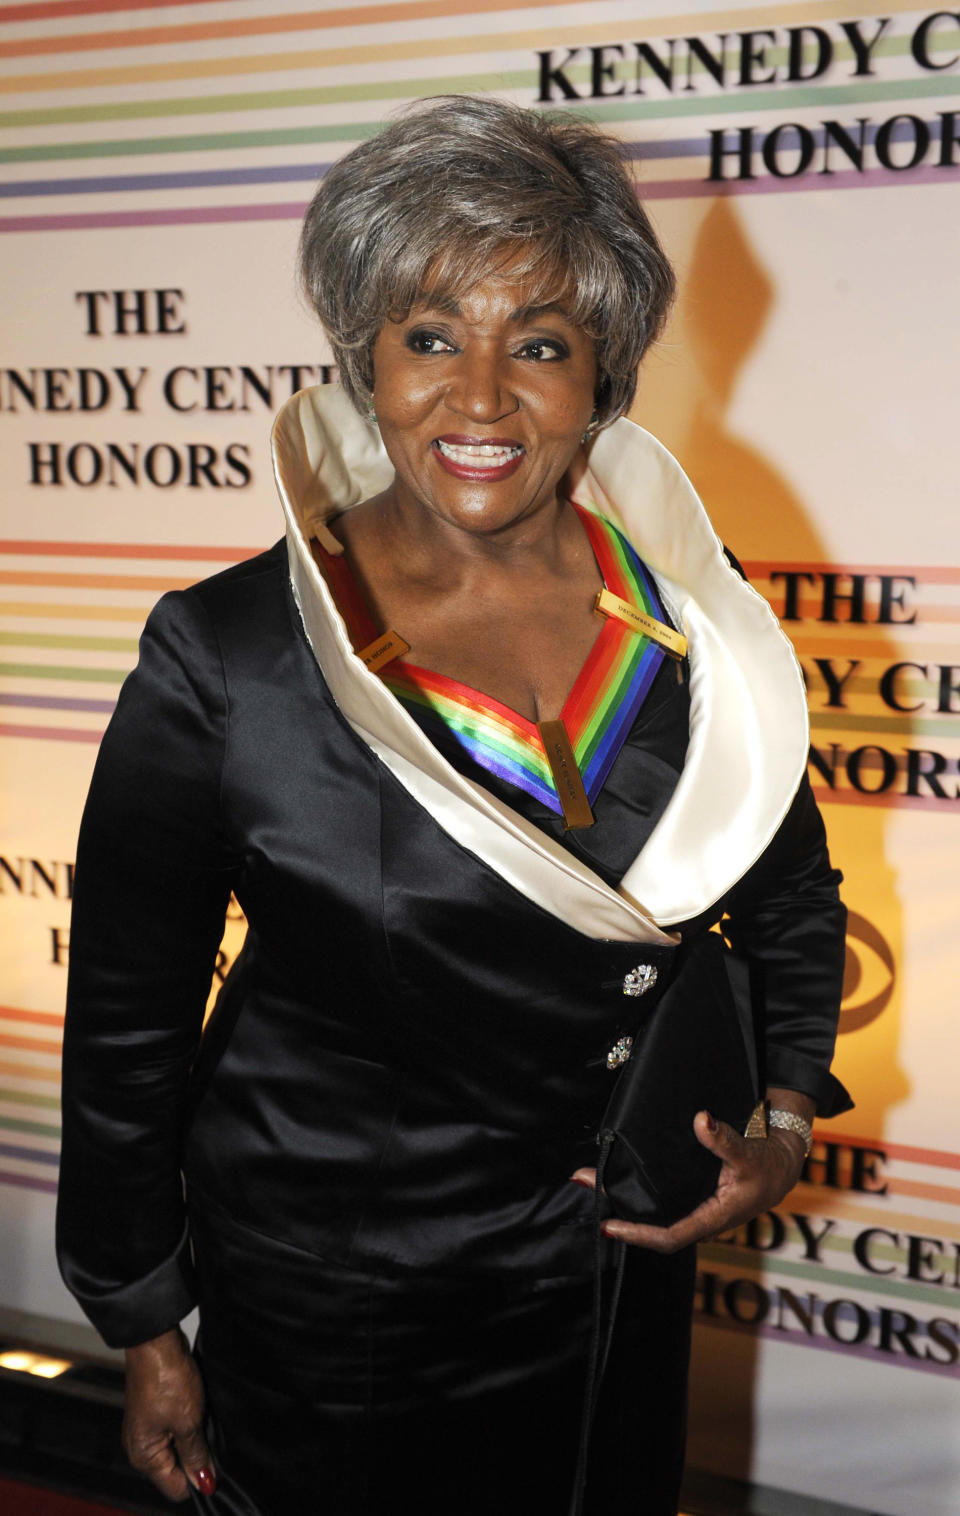 FILE - Kennedy Center honoree, opera singer Grace Bumbry, arrives at John F. Kennedy Center for the Performing Arts for the 2009 Kennedy Center Honors in Washington on Dec. 6, 2009. Bumbry, 86, a pioneering mezzo-soprano who became the first Black to sing at the Bayreuth Festival, died Sunday, May 7, 2023, at Evangelisches Krankenhaus, a hospital in Vienna, according to her publicist, David Lee Brewer. (AP Photo/Kevin Wolf, File)